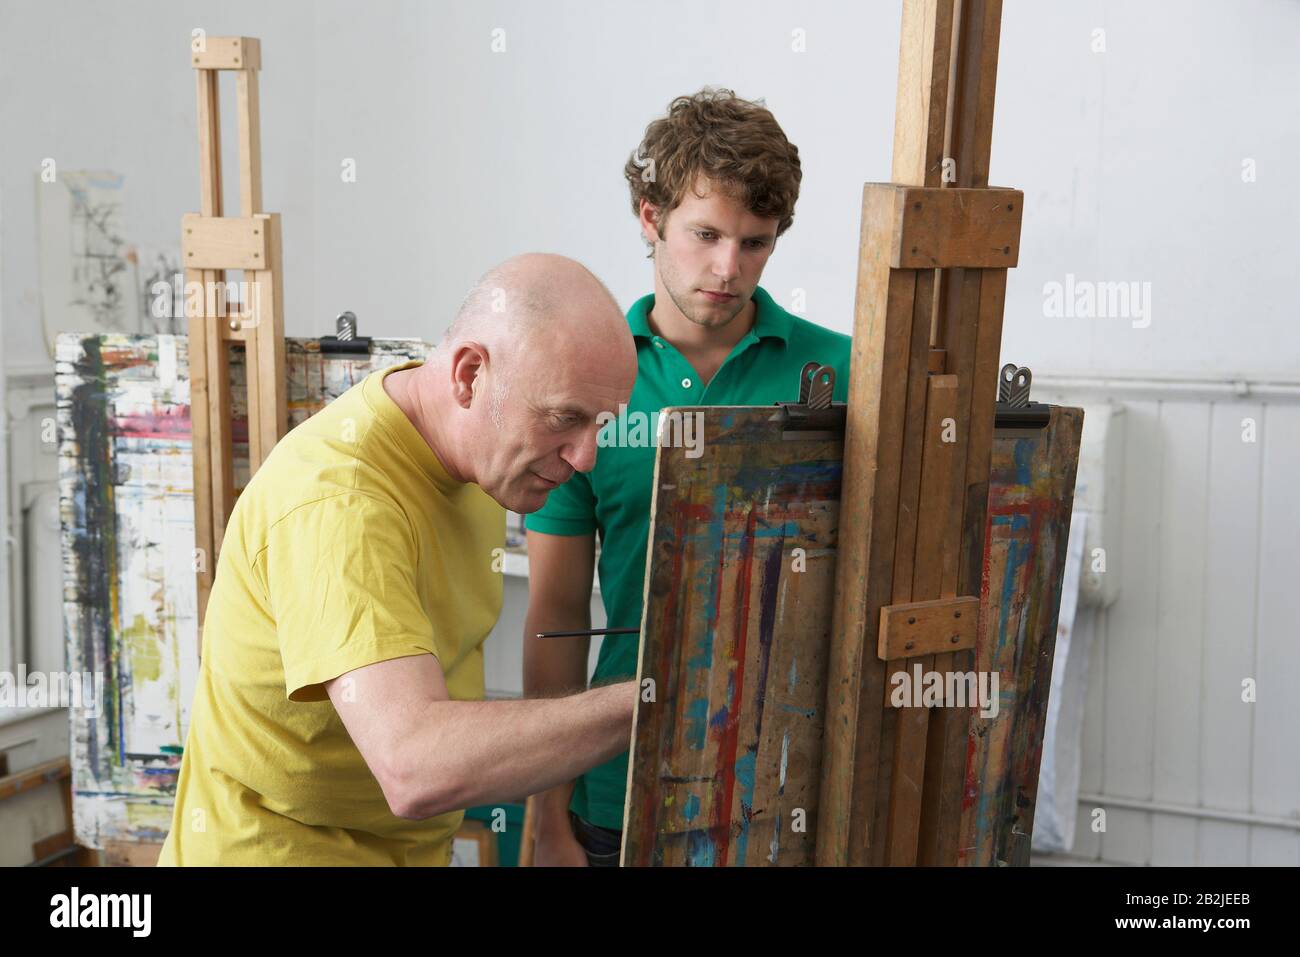 Student looking on as artist paints at easel in art studio Stock Photo